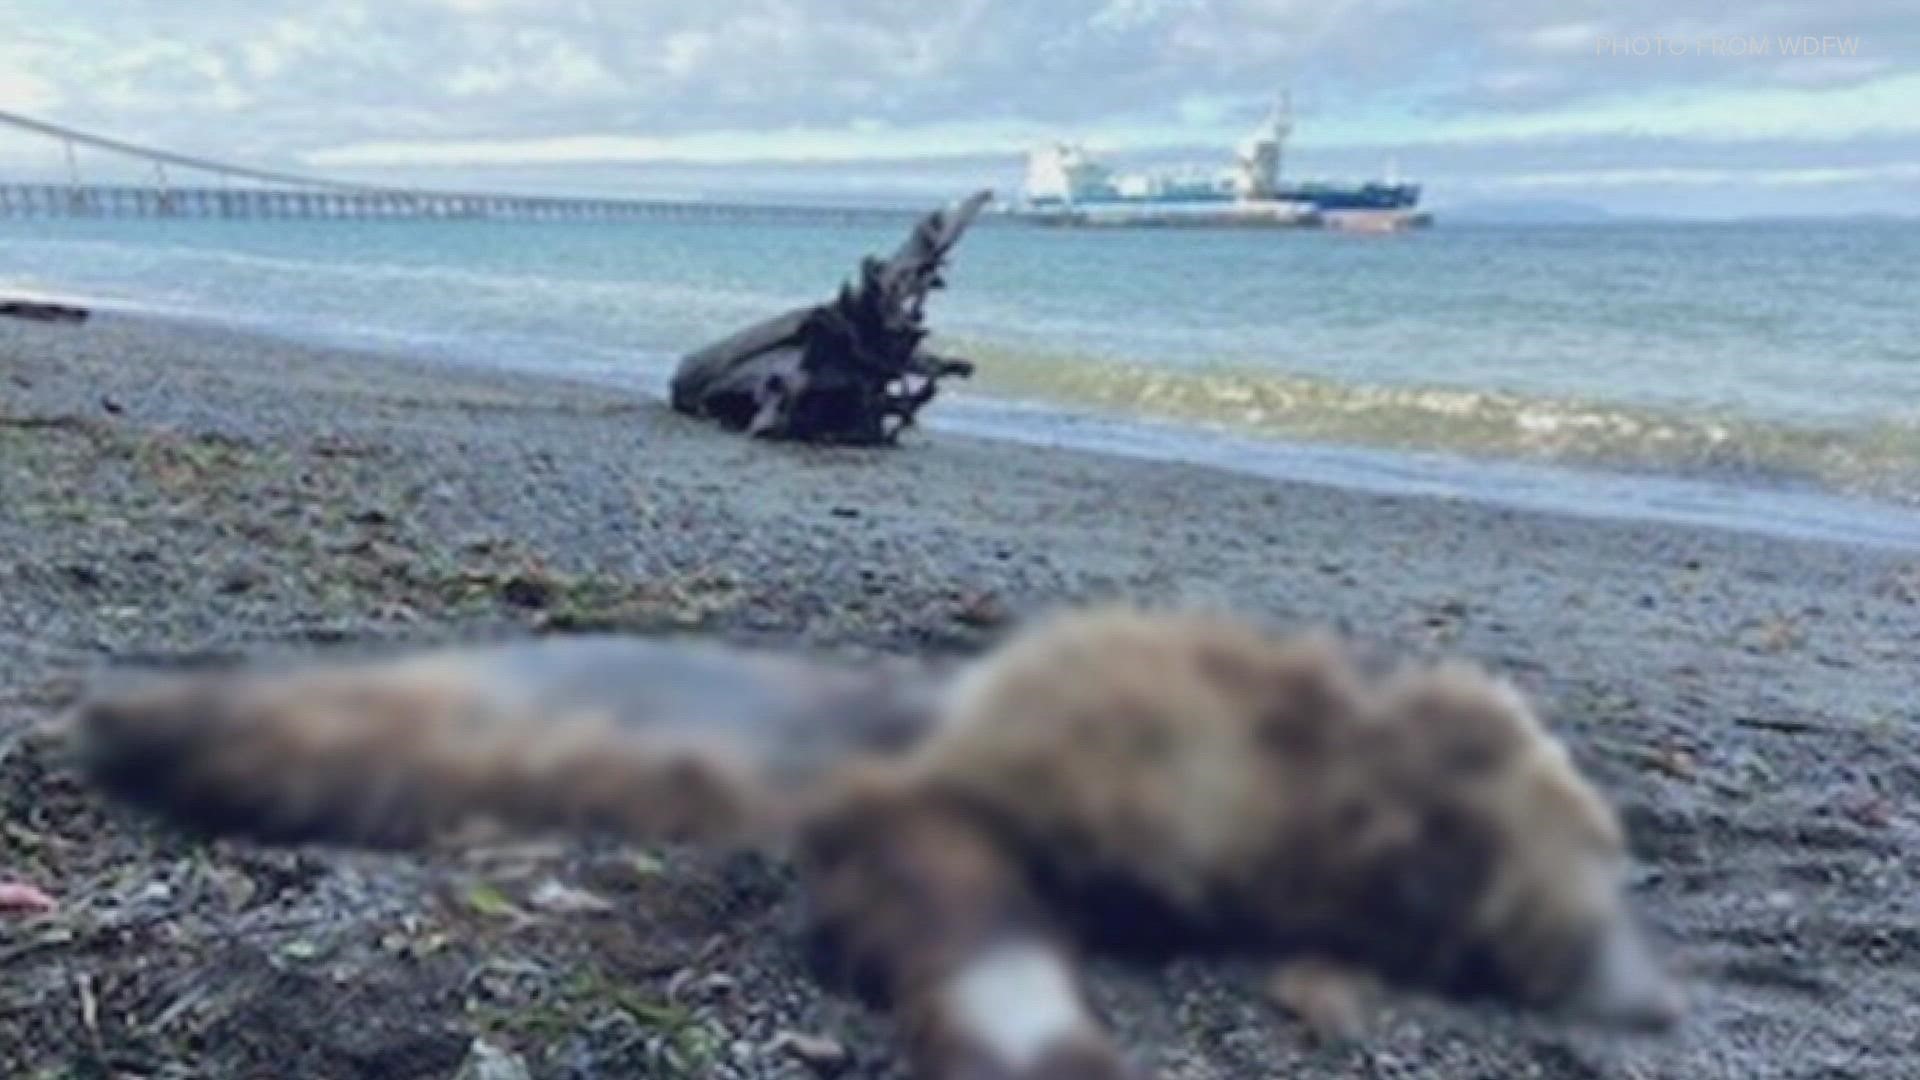 The bear carcass was found at Cherry Point. Grizzly bears aren't common in western Washington but have been known to swim from British Columbia to Vancouver Island.